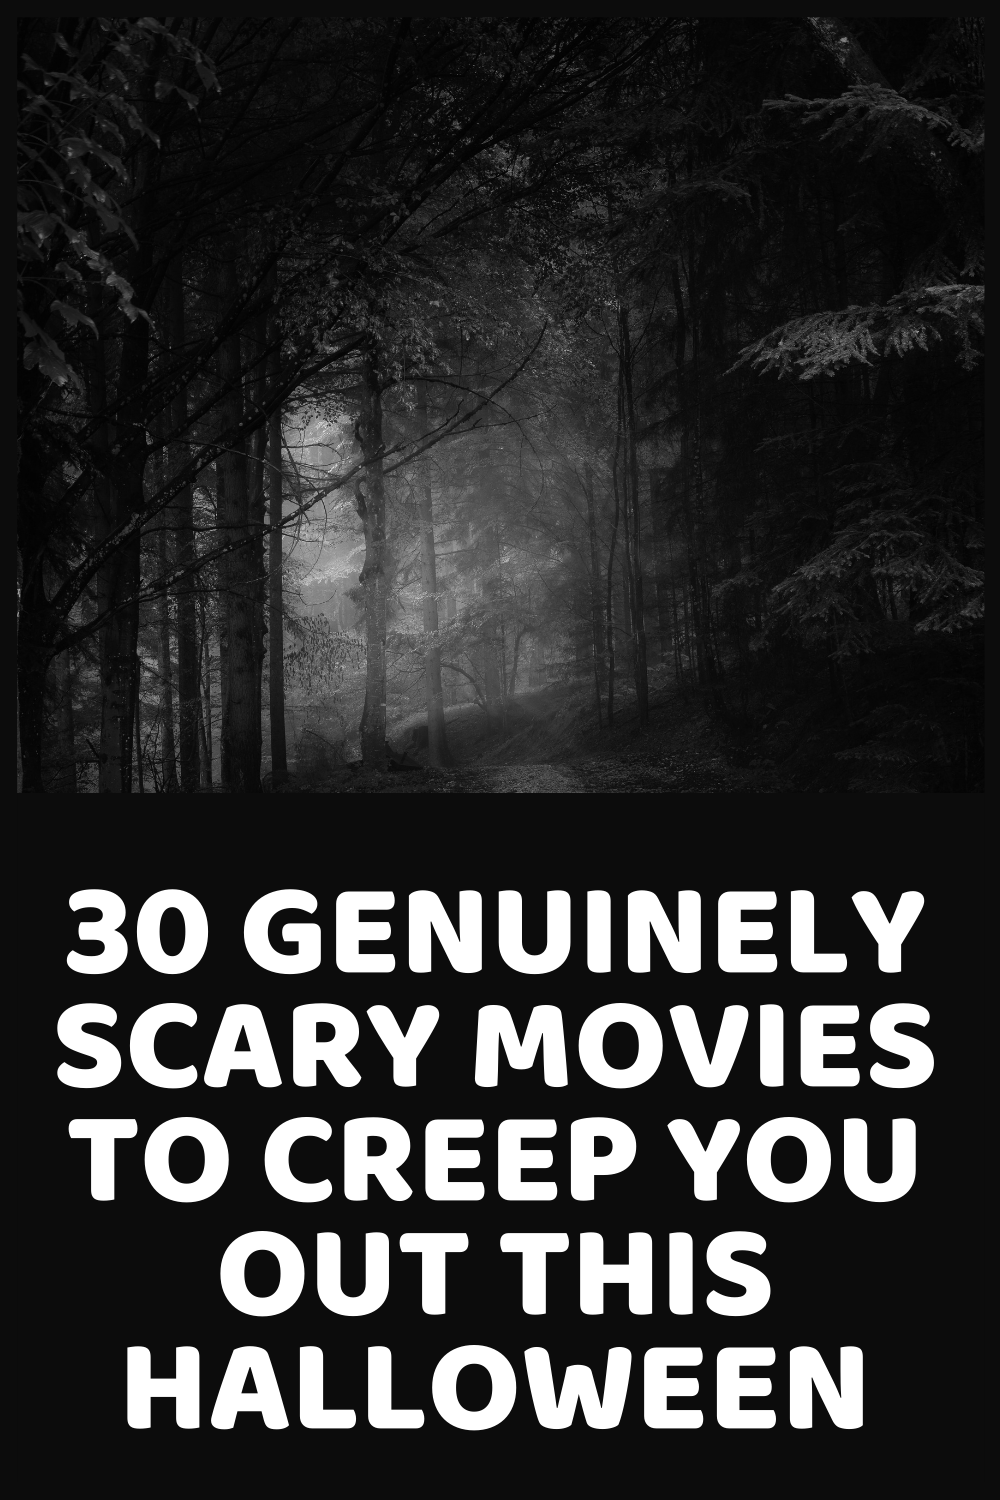 30 Genuinely Scary Movies To Creep You Out This Halloween